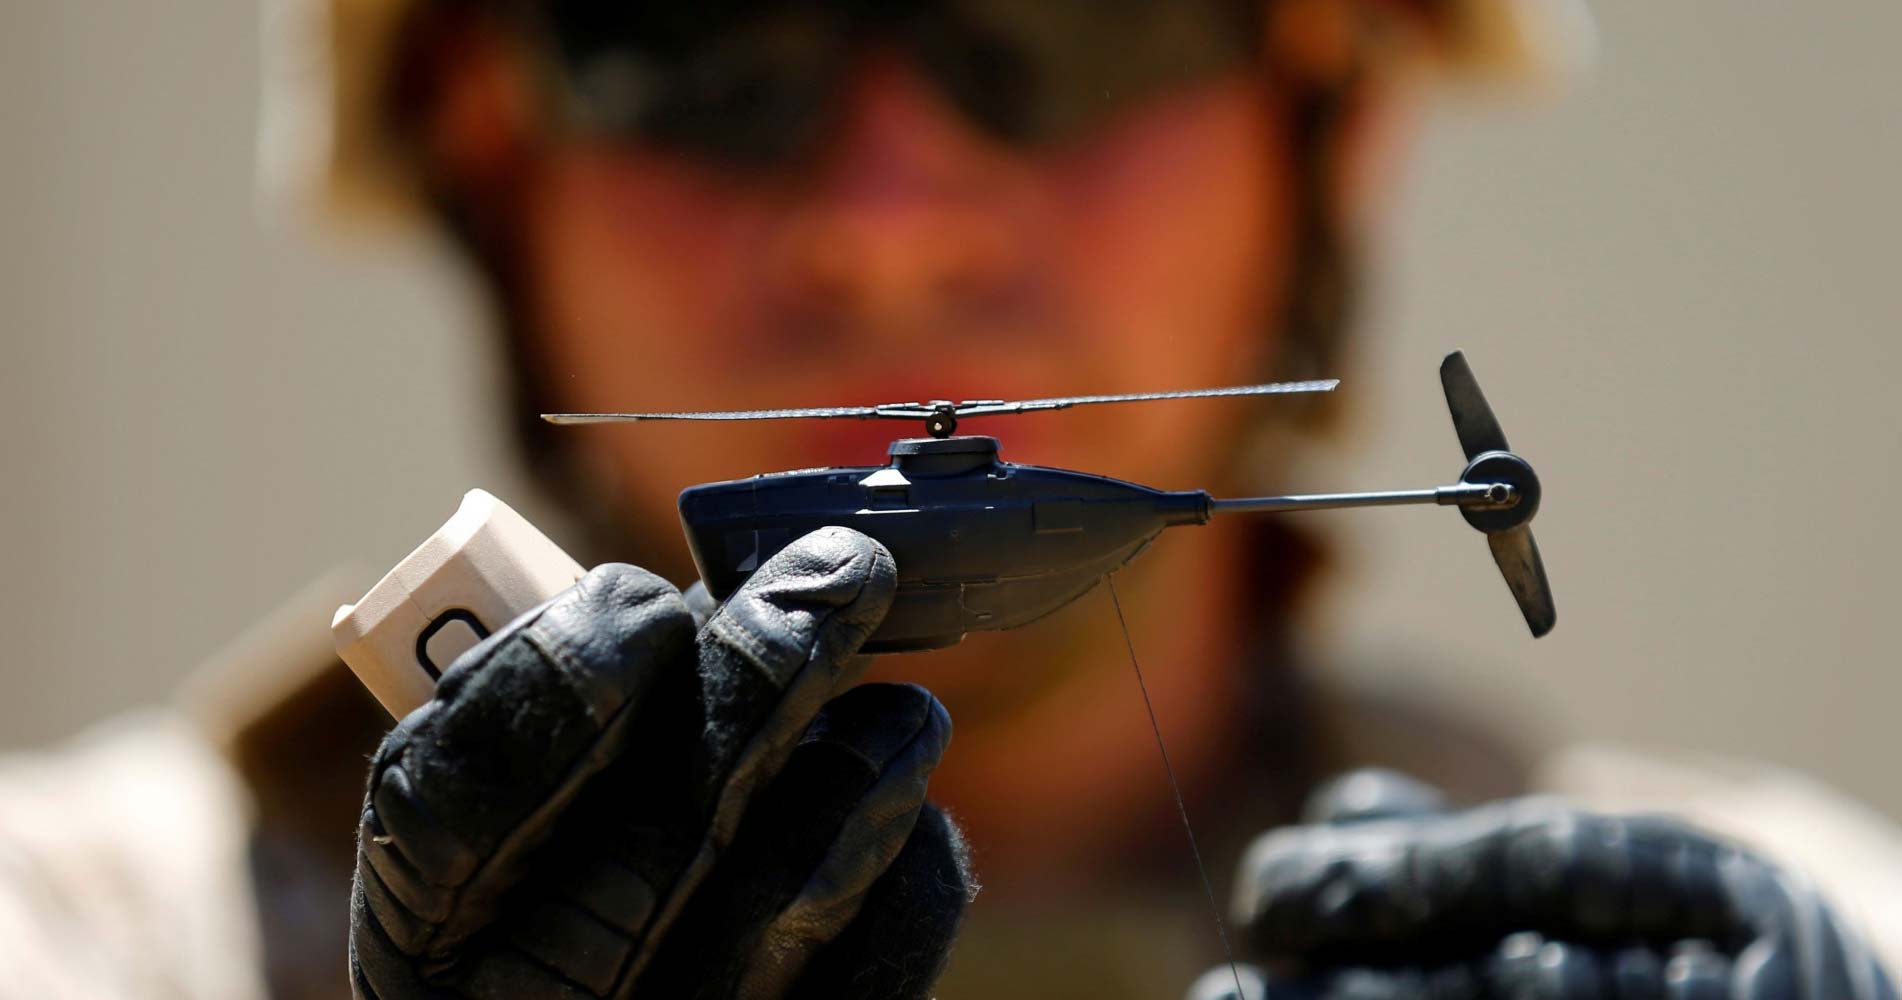 Nano drone held by a gloved hand